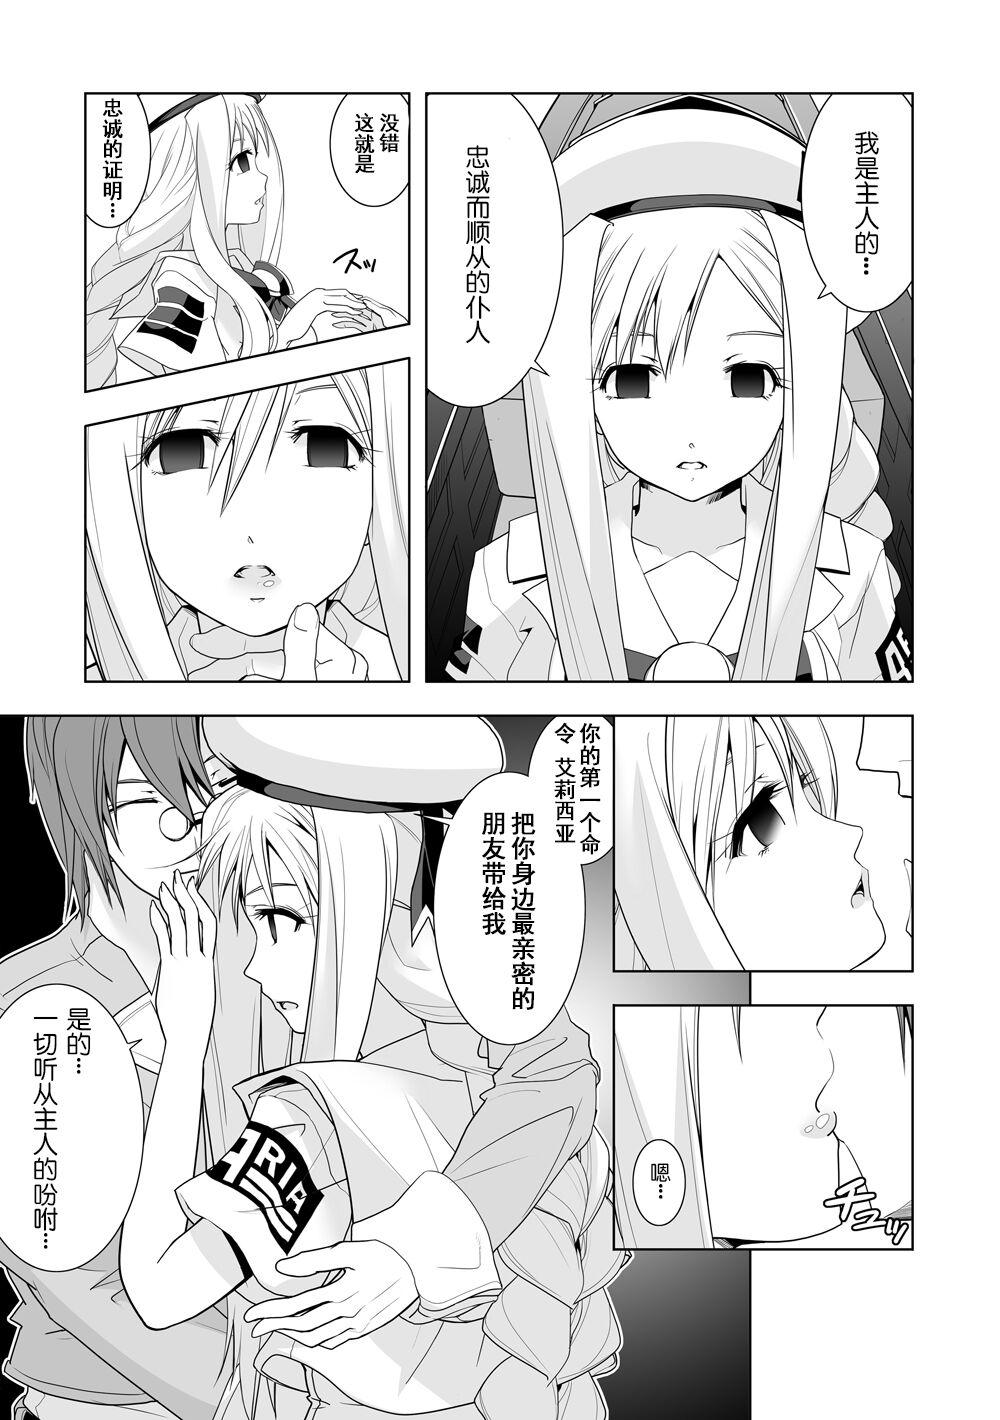 Screaming AR*A Mind-control Manga - Aria Double Blowjob - Picture 3